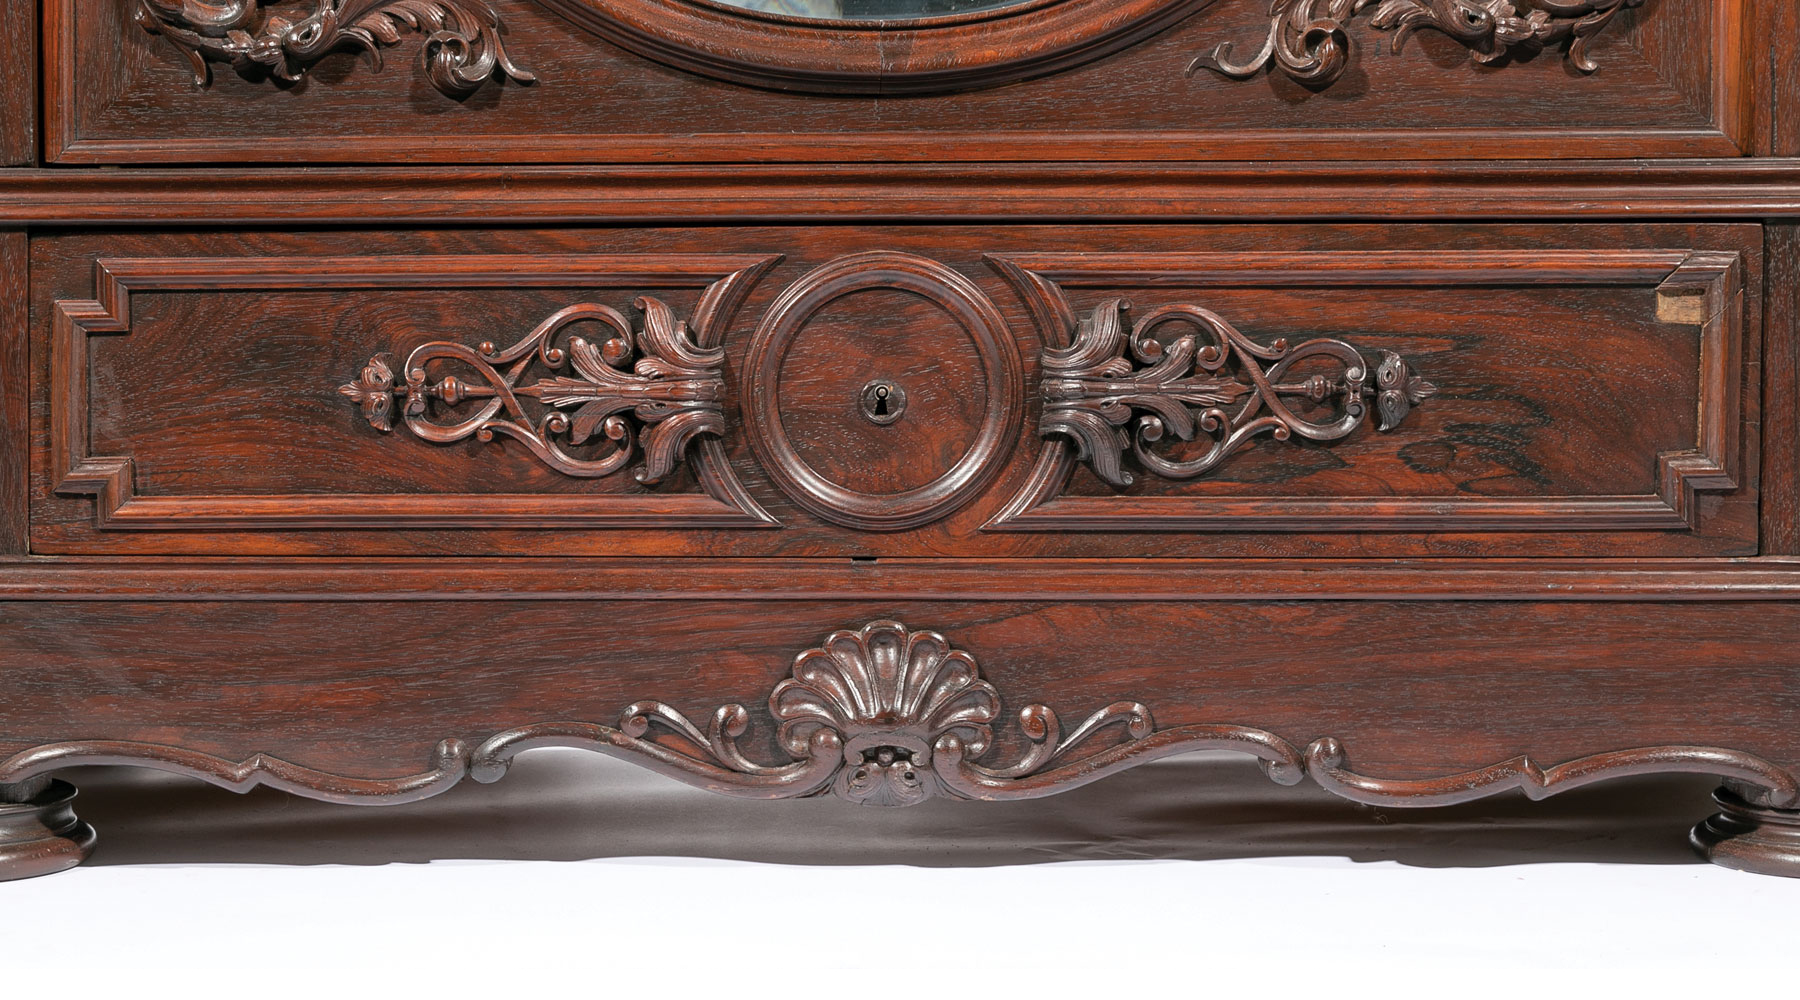 Very Fine American Carved Rosewood Bedroom Suite , mid-19th c., labeled A. (Alexander) Roux, incl. - Image 12 of 20